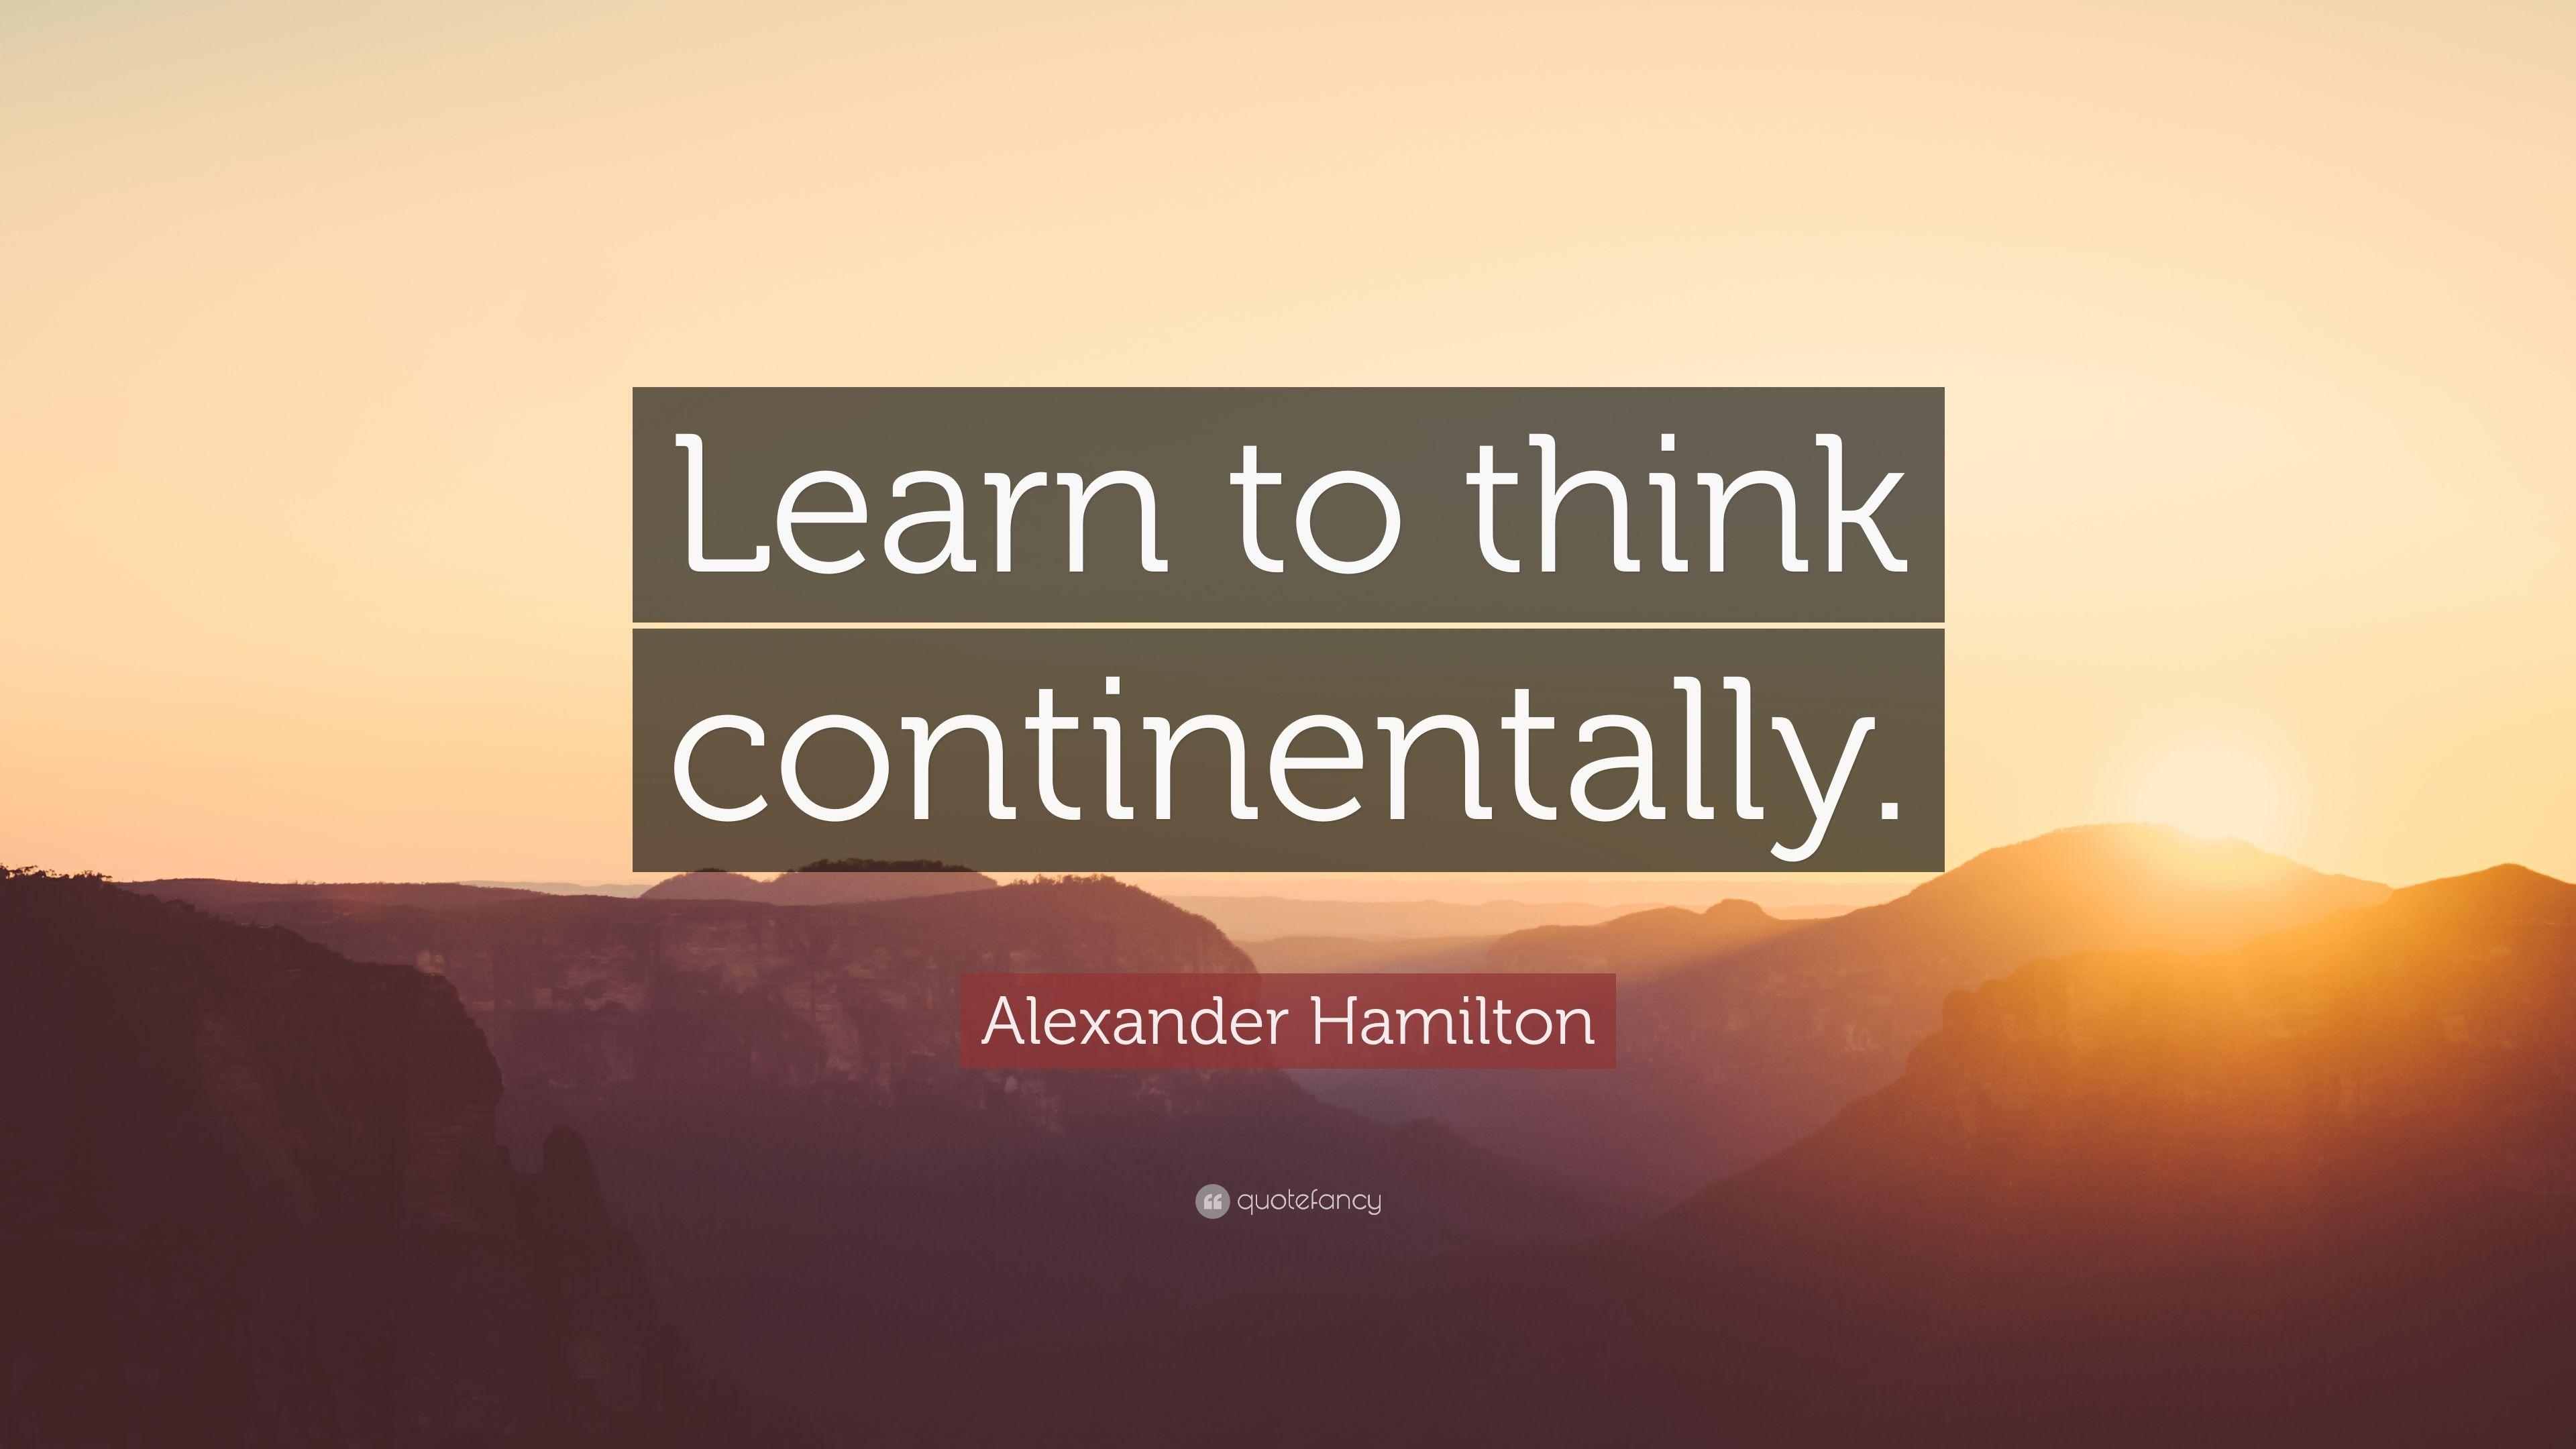 Alexander Hamilton Quote: “Learn to think continentally.” 10